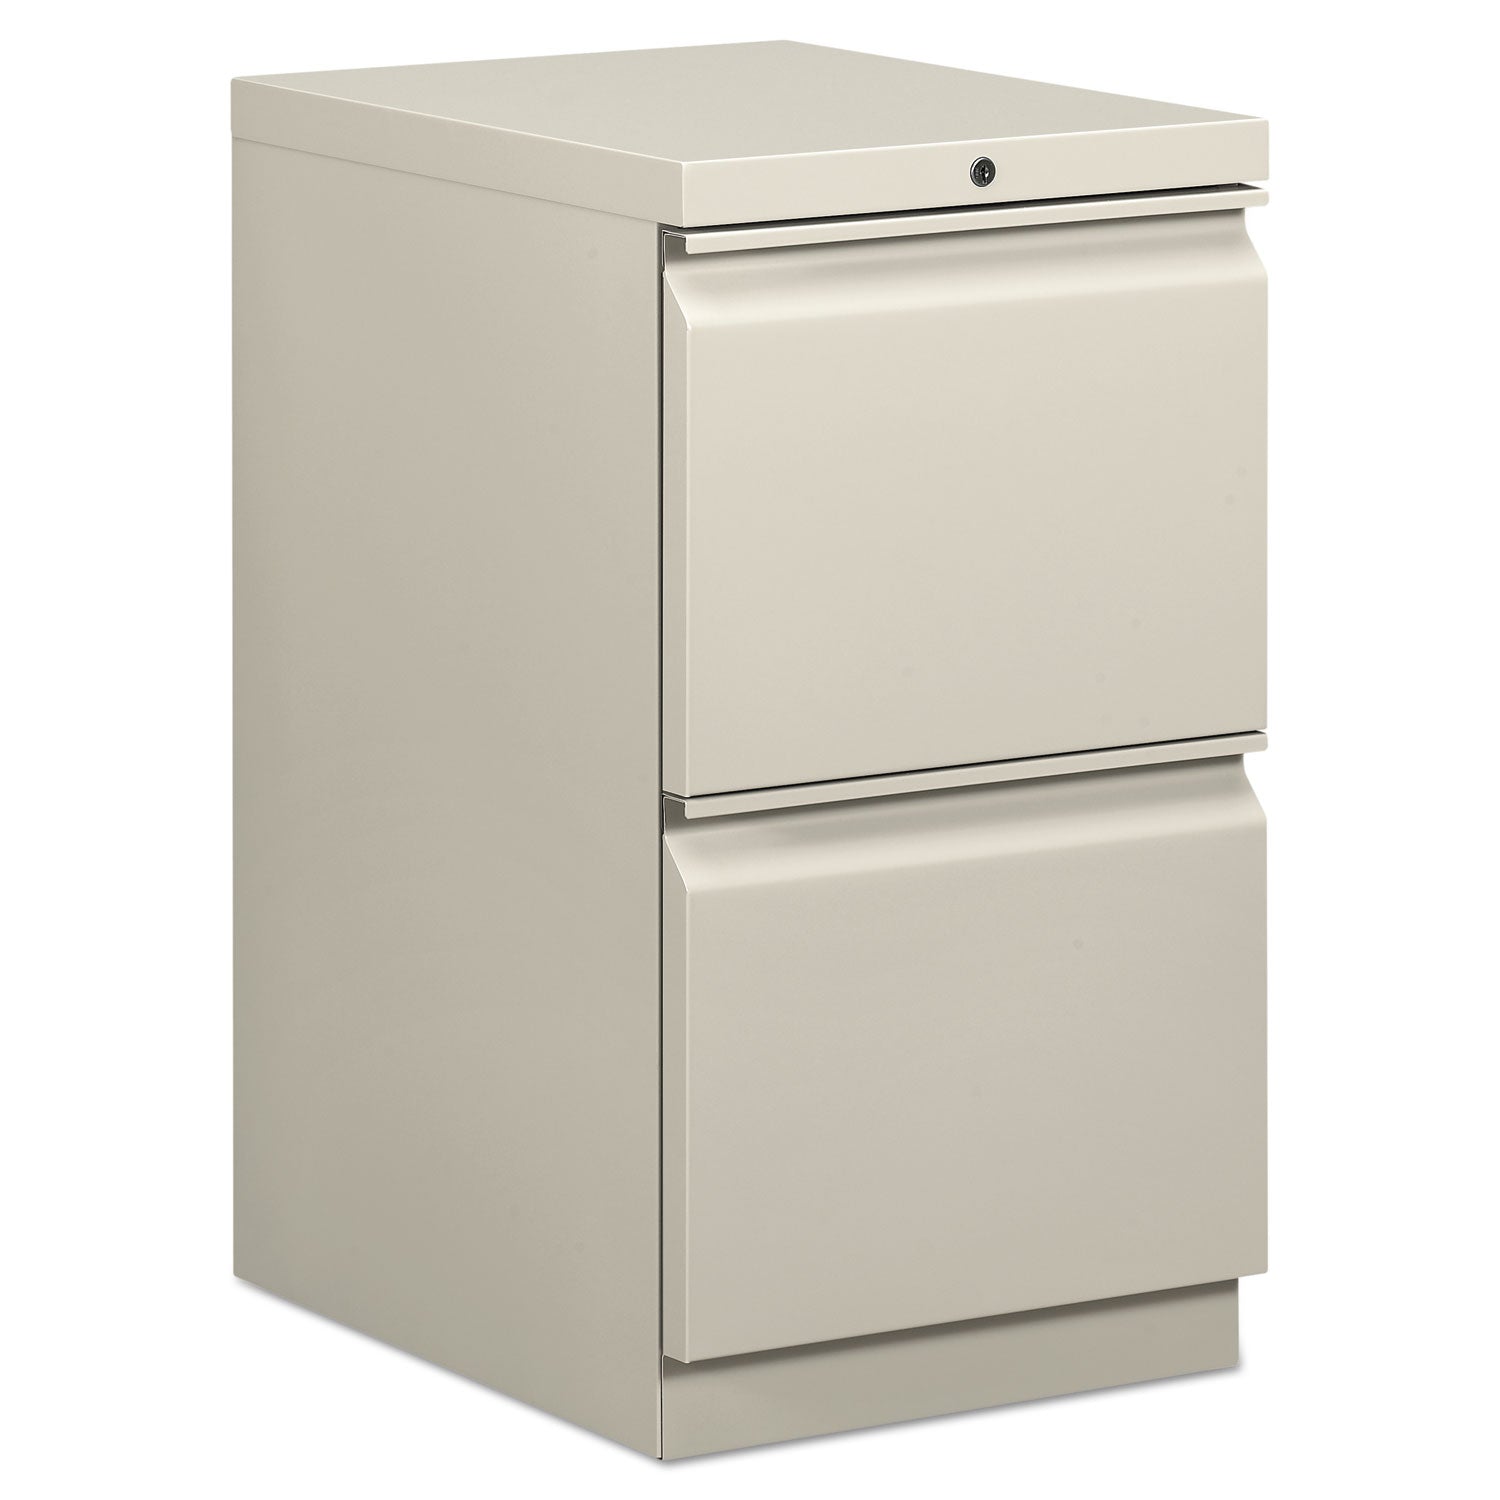 mobile-pedestals-left-or-right-2-legal-letter-size-file-drawers-light-gray-15-x-20-x-28_bsxhbmp2fq - 1